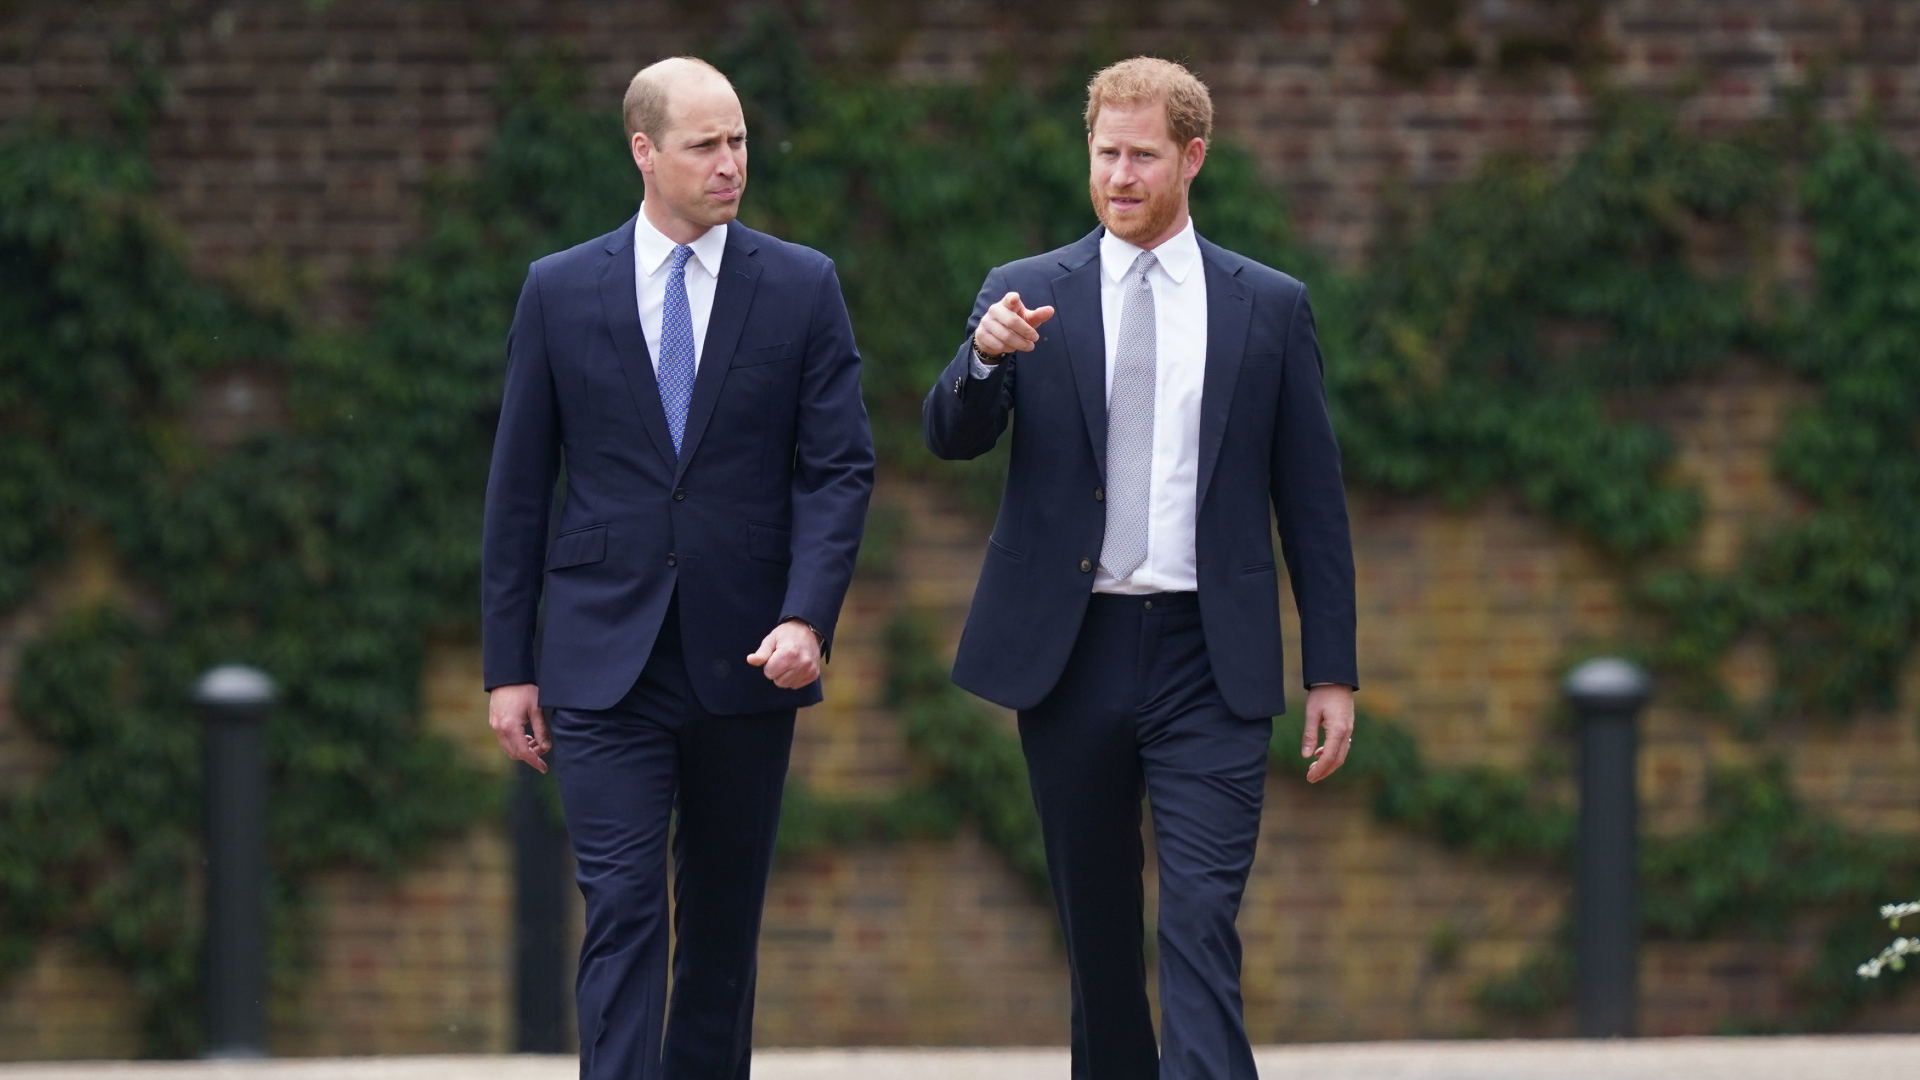 Prince William Can't Recognize Prince Harry, As Relationship Reportedly Suffers Irreparable "Damage"